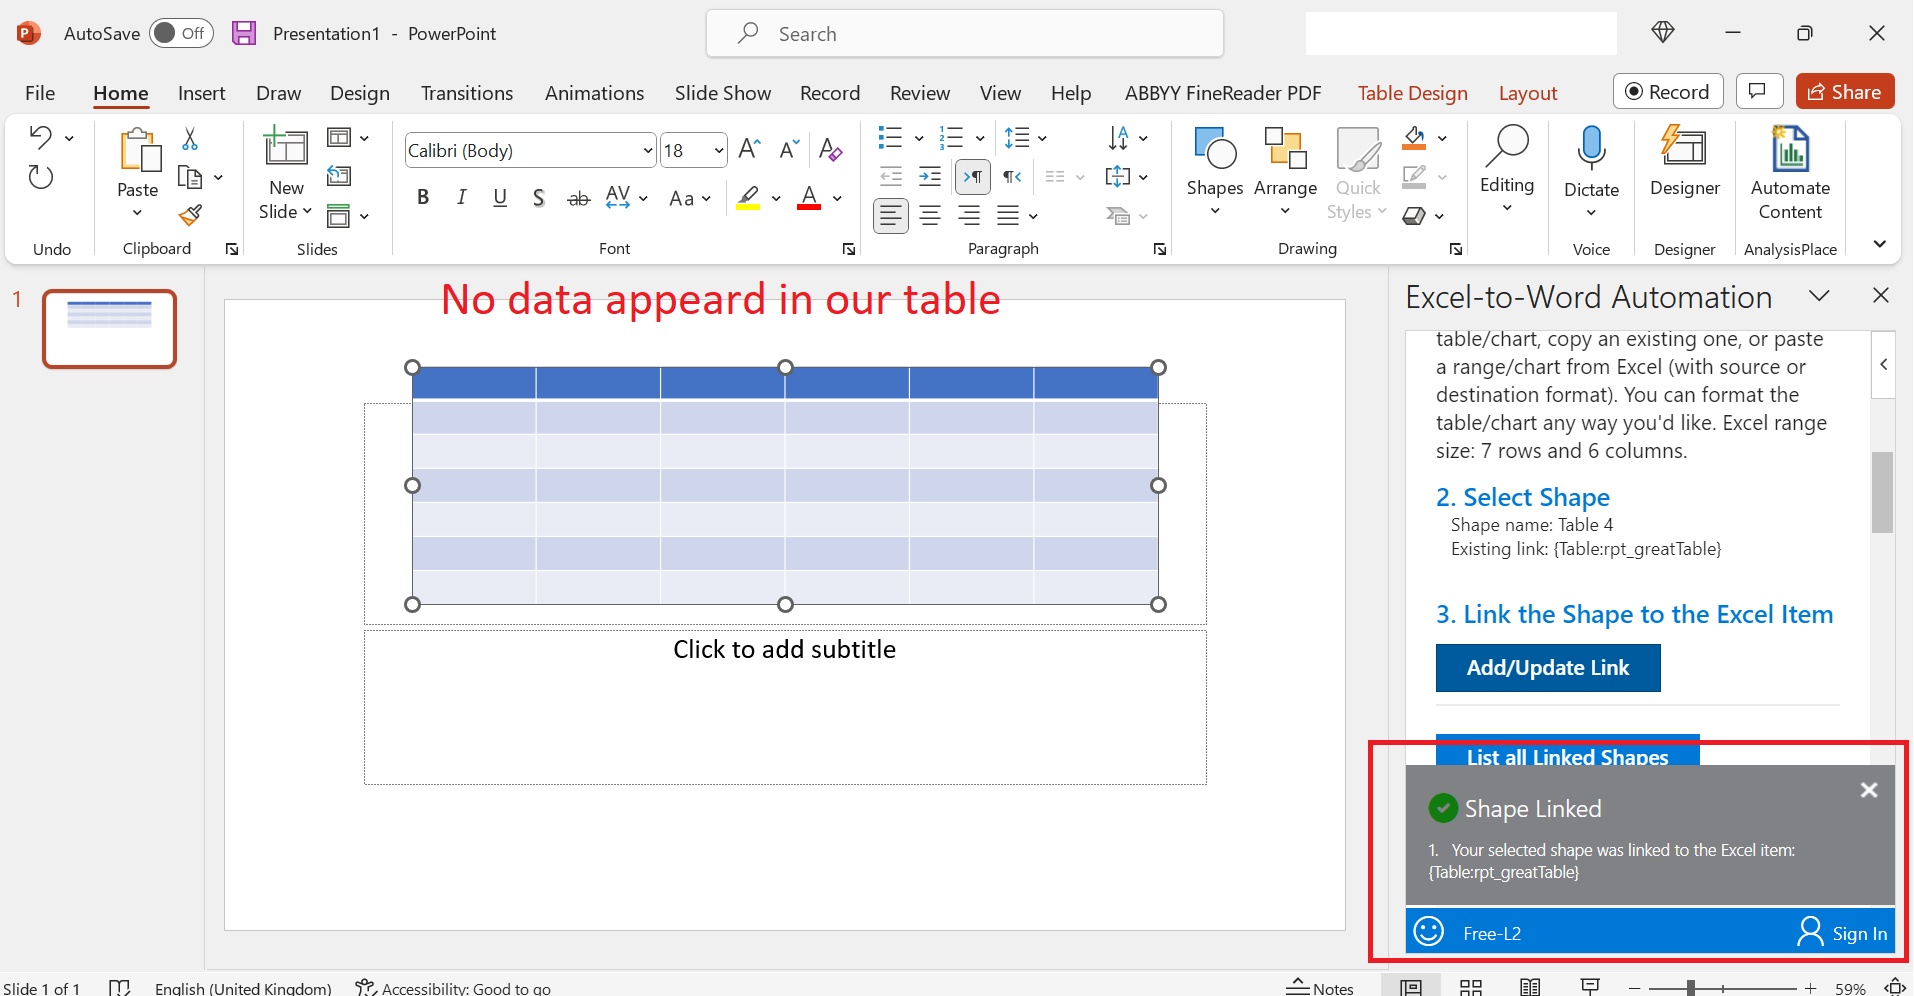 Analysis Place's addin in PowerPoint said the data was updated, but it was not